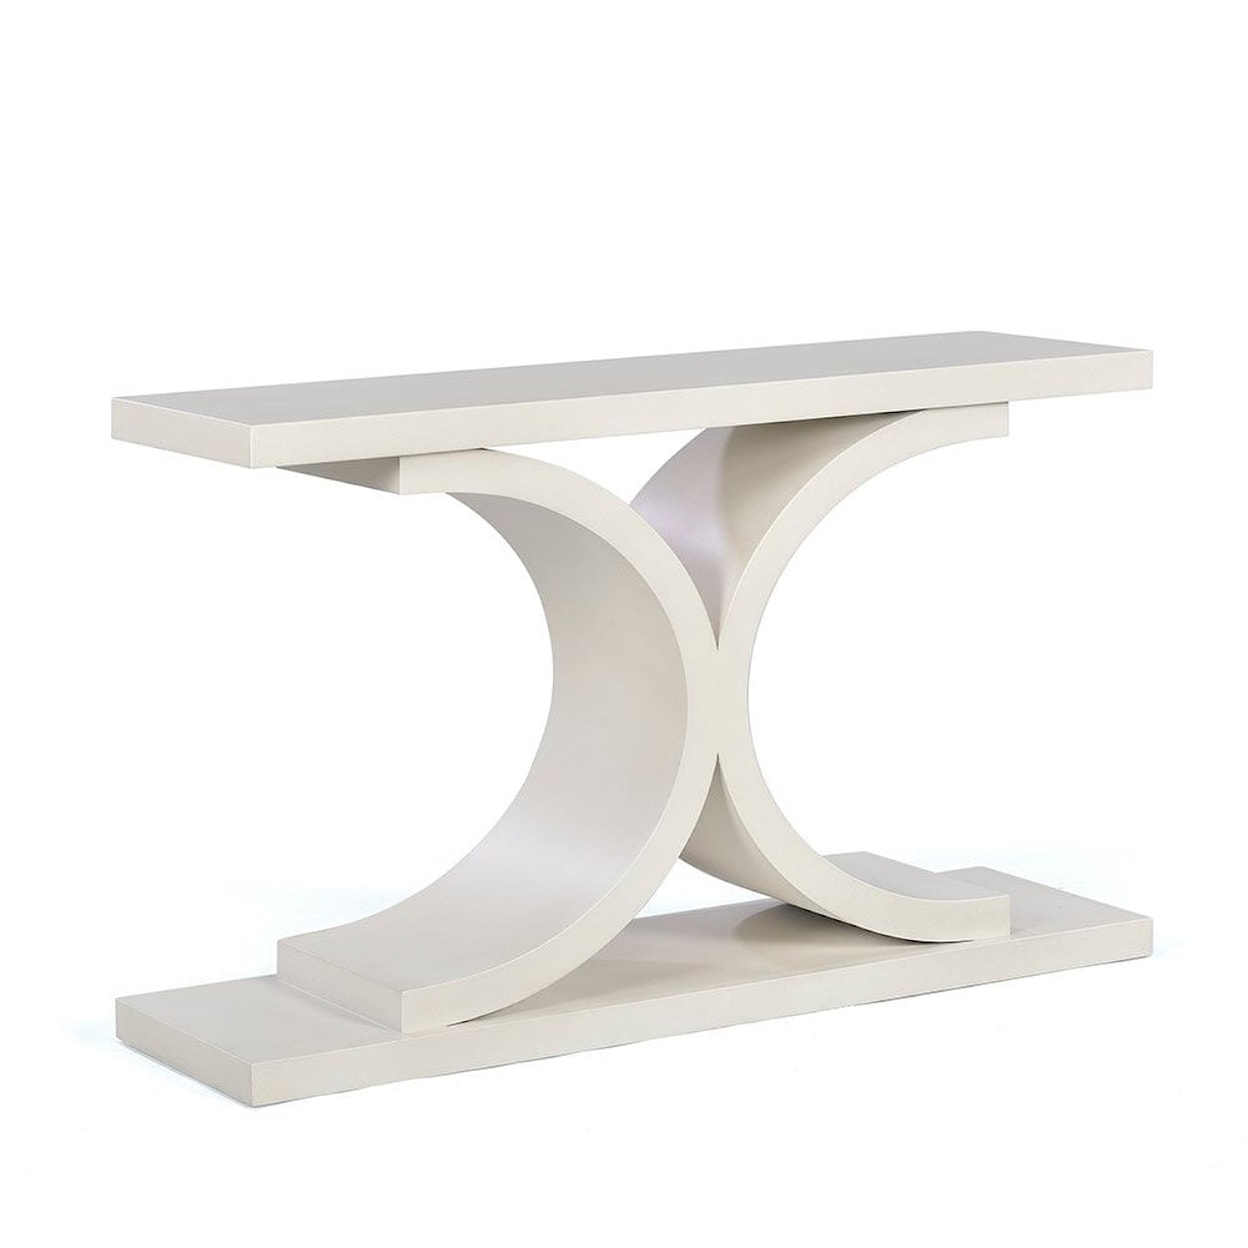 Oliver Home Furnishings Console Tables Sea Console